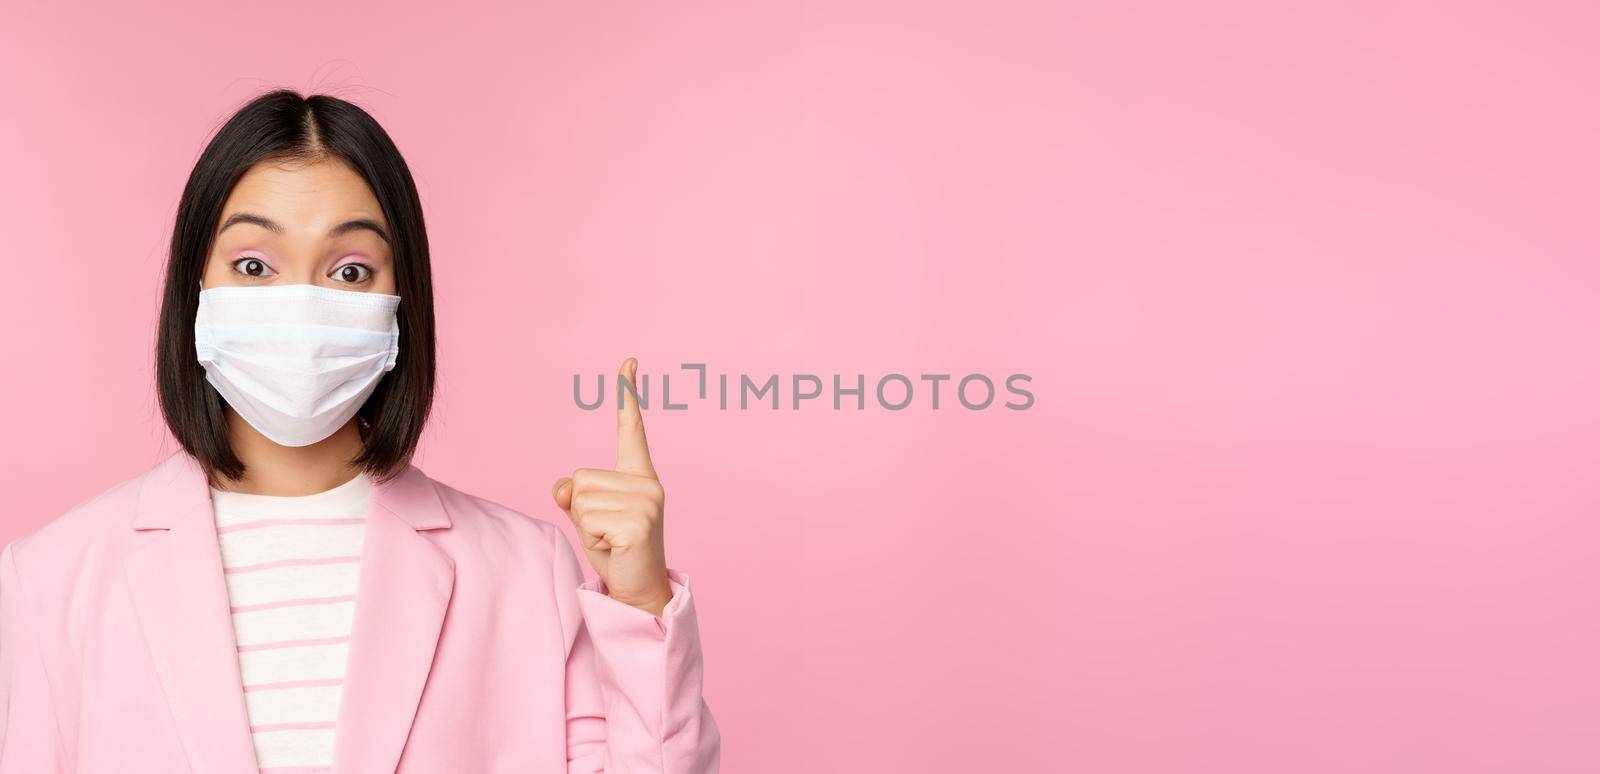 Close up portrait of asian businesswoman in medical face mask and suit, pointing finger up, showing advertisement, top banner, standing over pink background.